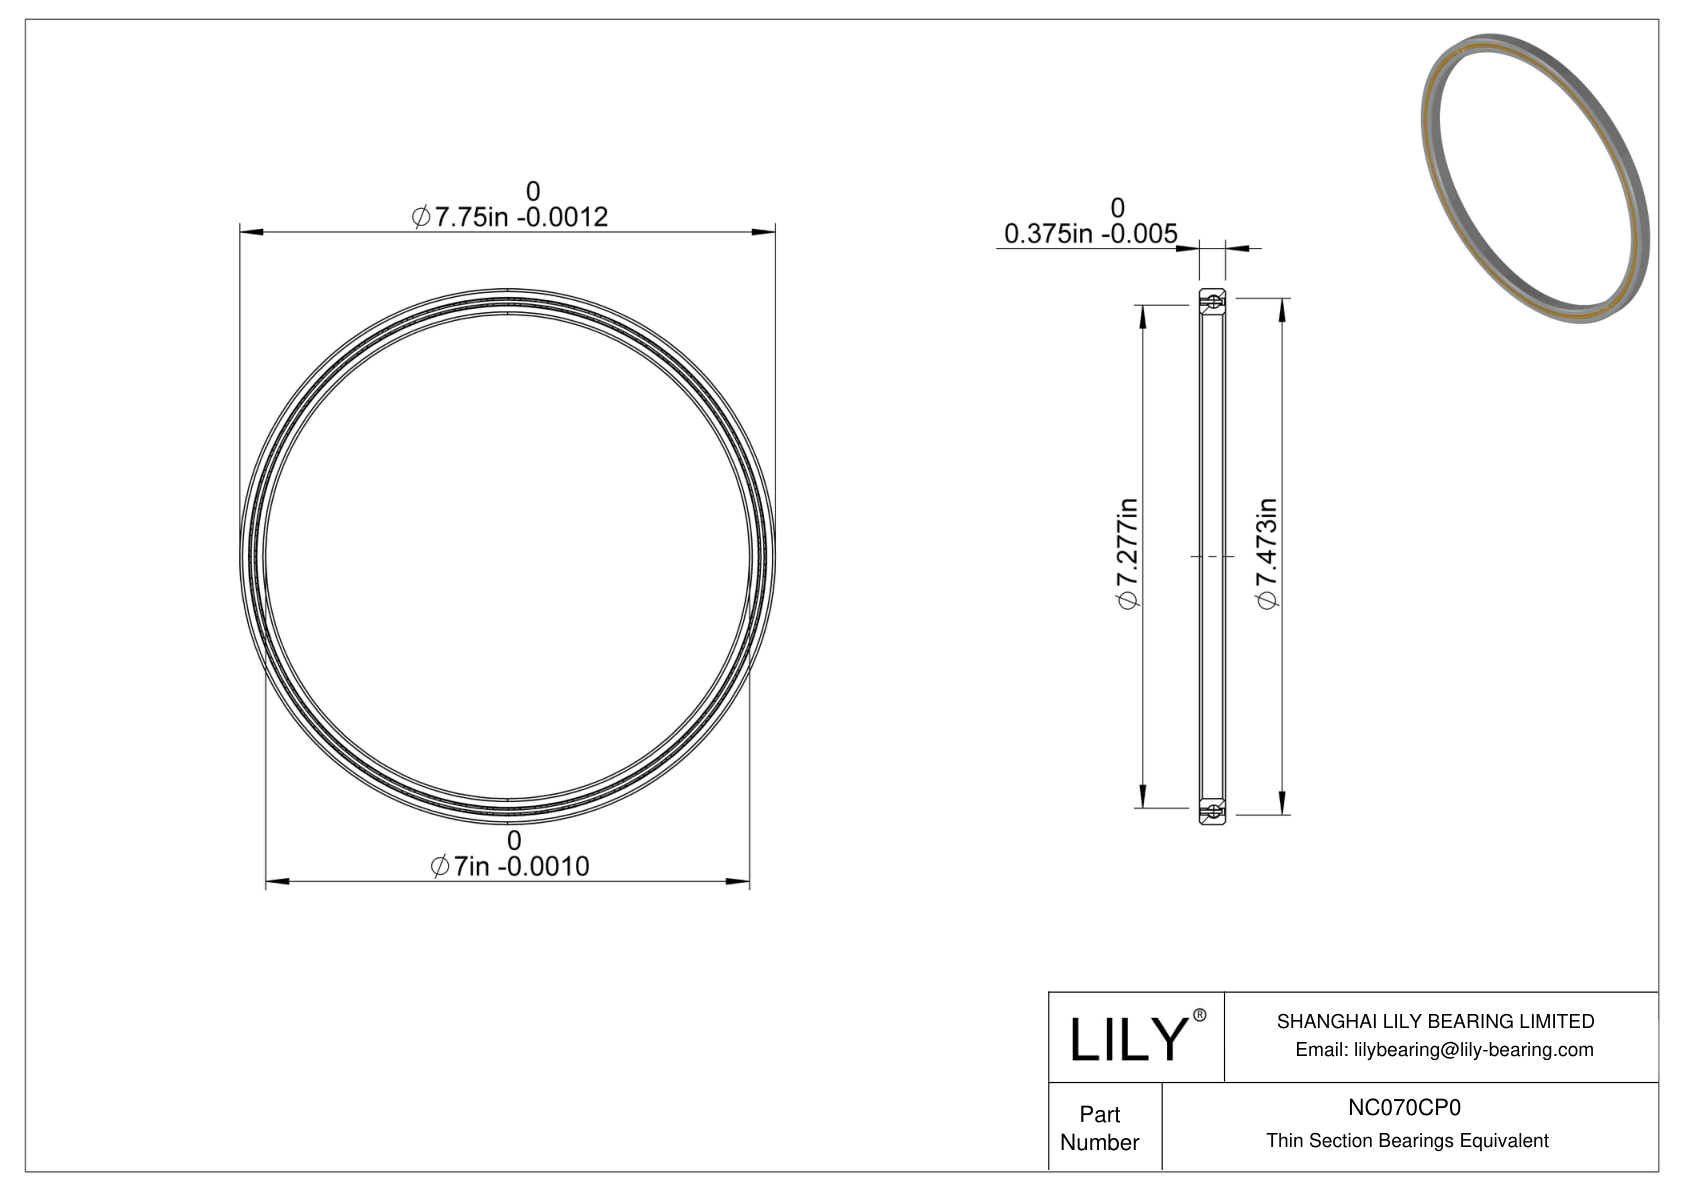 NC070CP0 Constant Section (CS) Bearings cad drawing